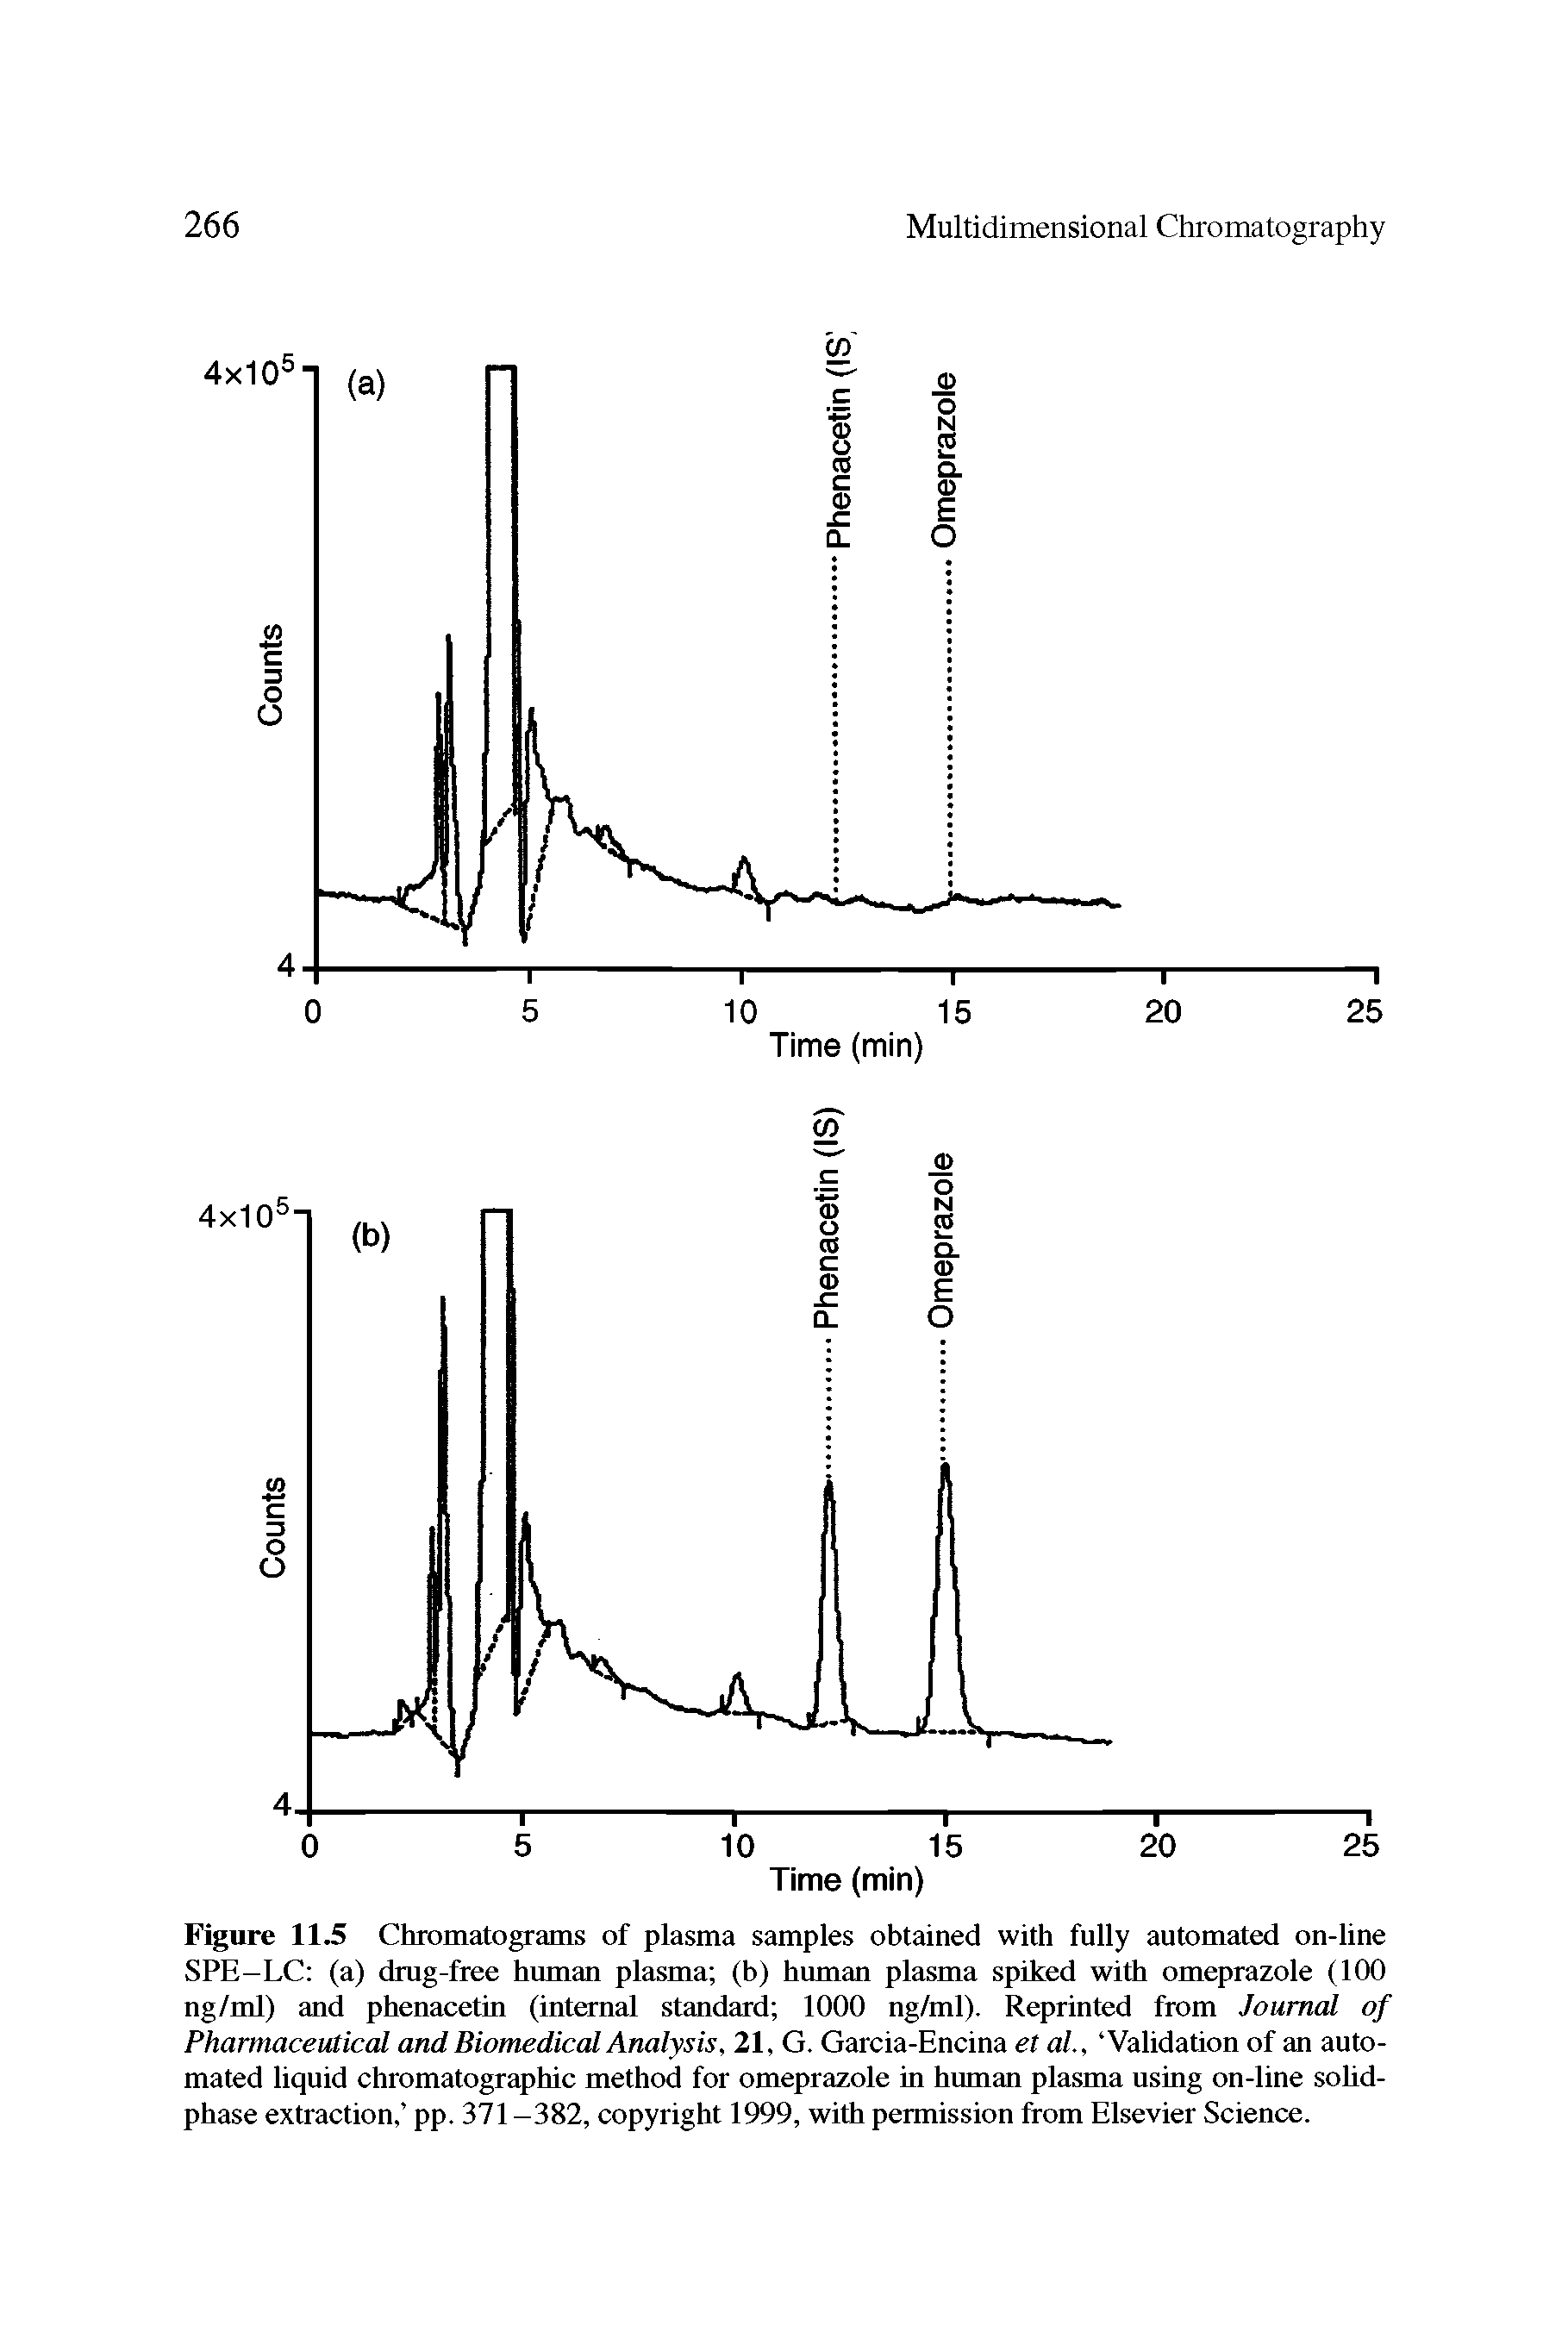 Figure 11.5 Chromatograms of plasma samples obtained with fully automated on-line SPE-LC (a) drug-free human plasma (b) human plasma spiked with omeprazole (100 ng/ml) and phenacetin (internal standard 1000 ng/ml). Reprinted from Journal of Pharmaceutical and Biomedical Analysis, 21, G. Garcia-Encina et al., Validation of an automated liquid chromatographic method for omeprazole in human plasma using on-line solid-phase extraction, pp. 371-382, copyright 1999, with permission from Elsevier Science.